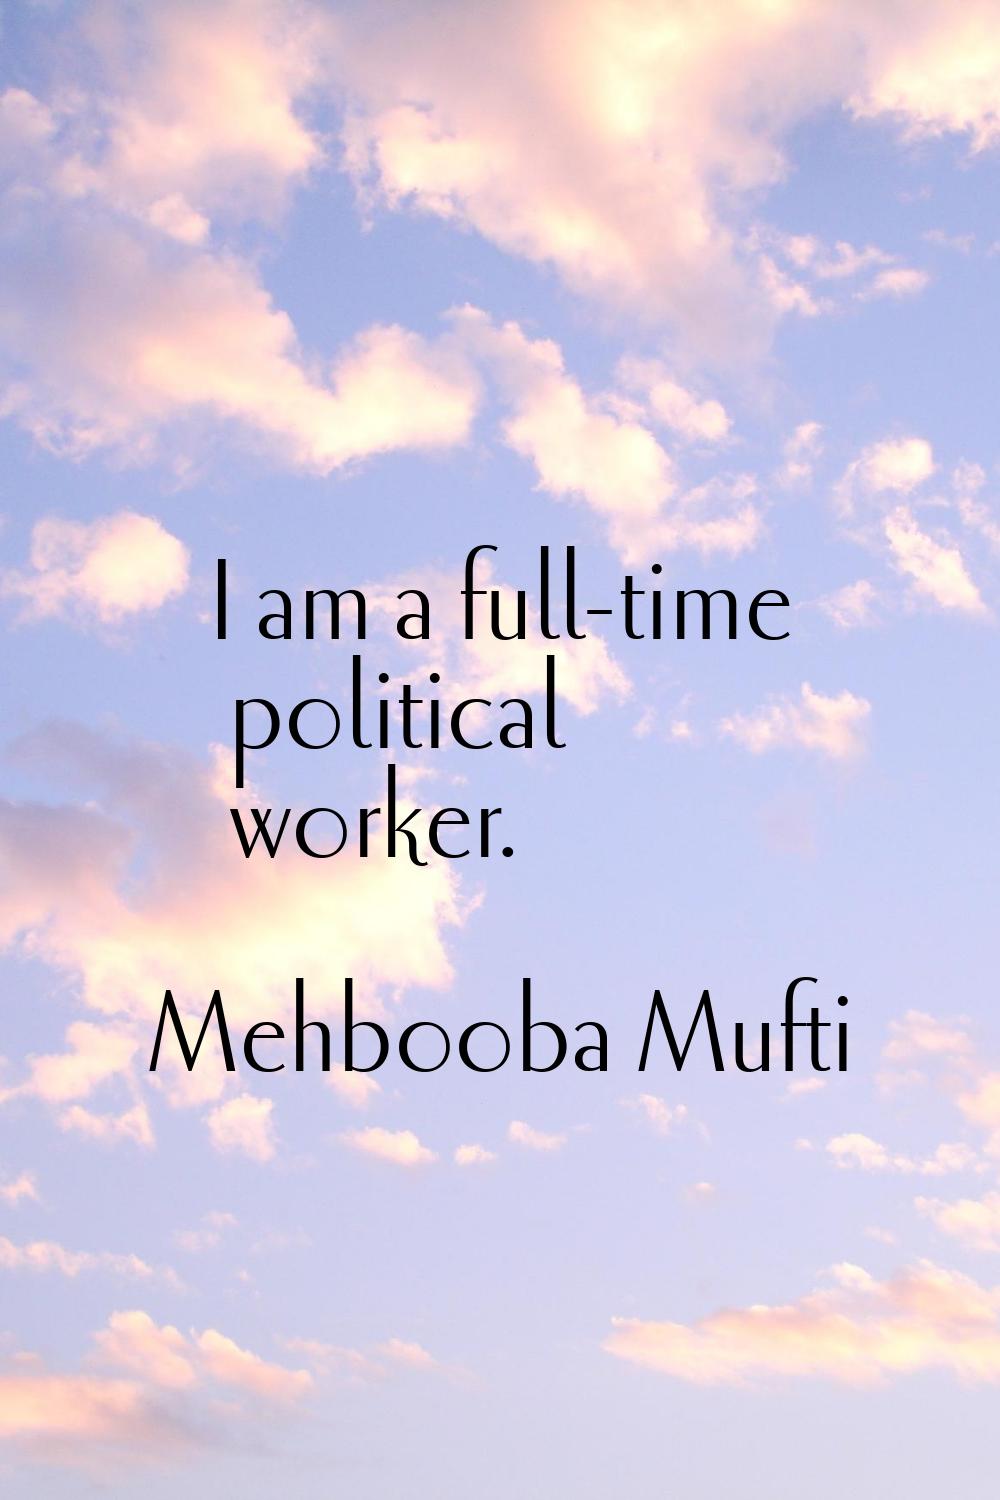 I am a full-time political worker.